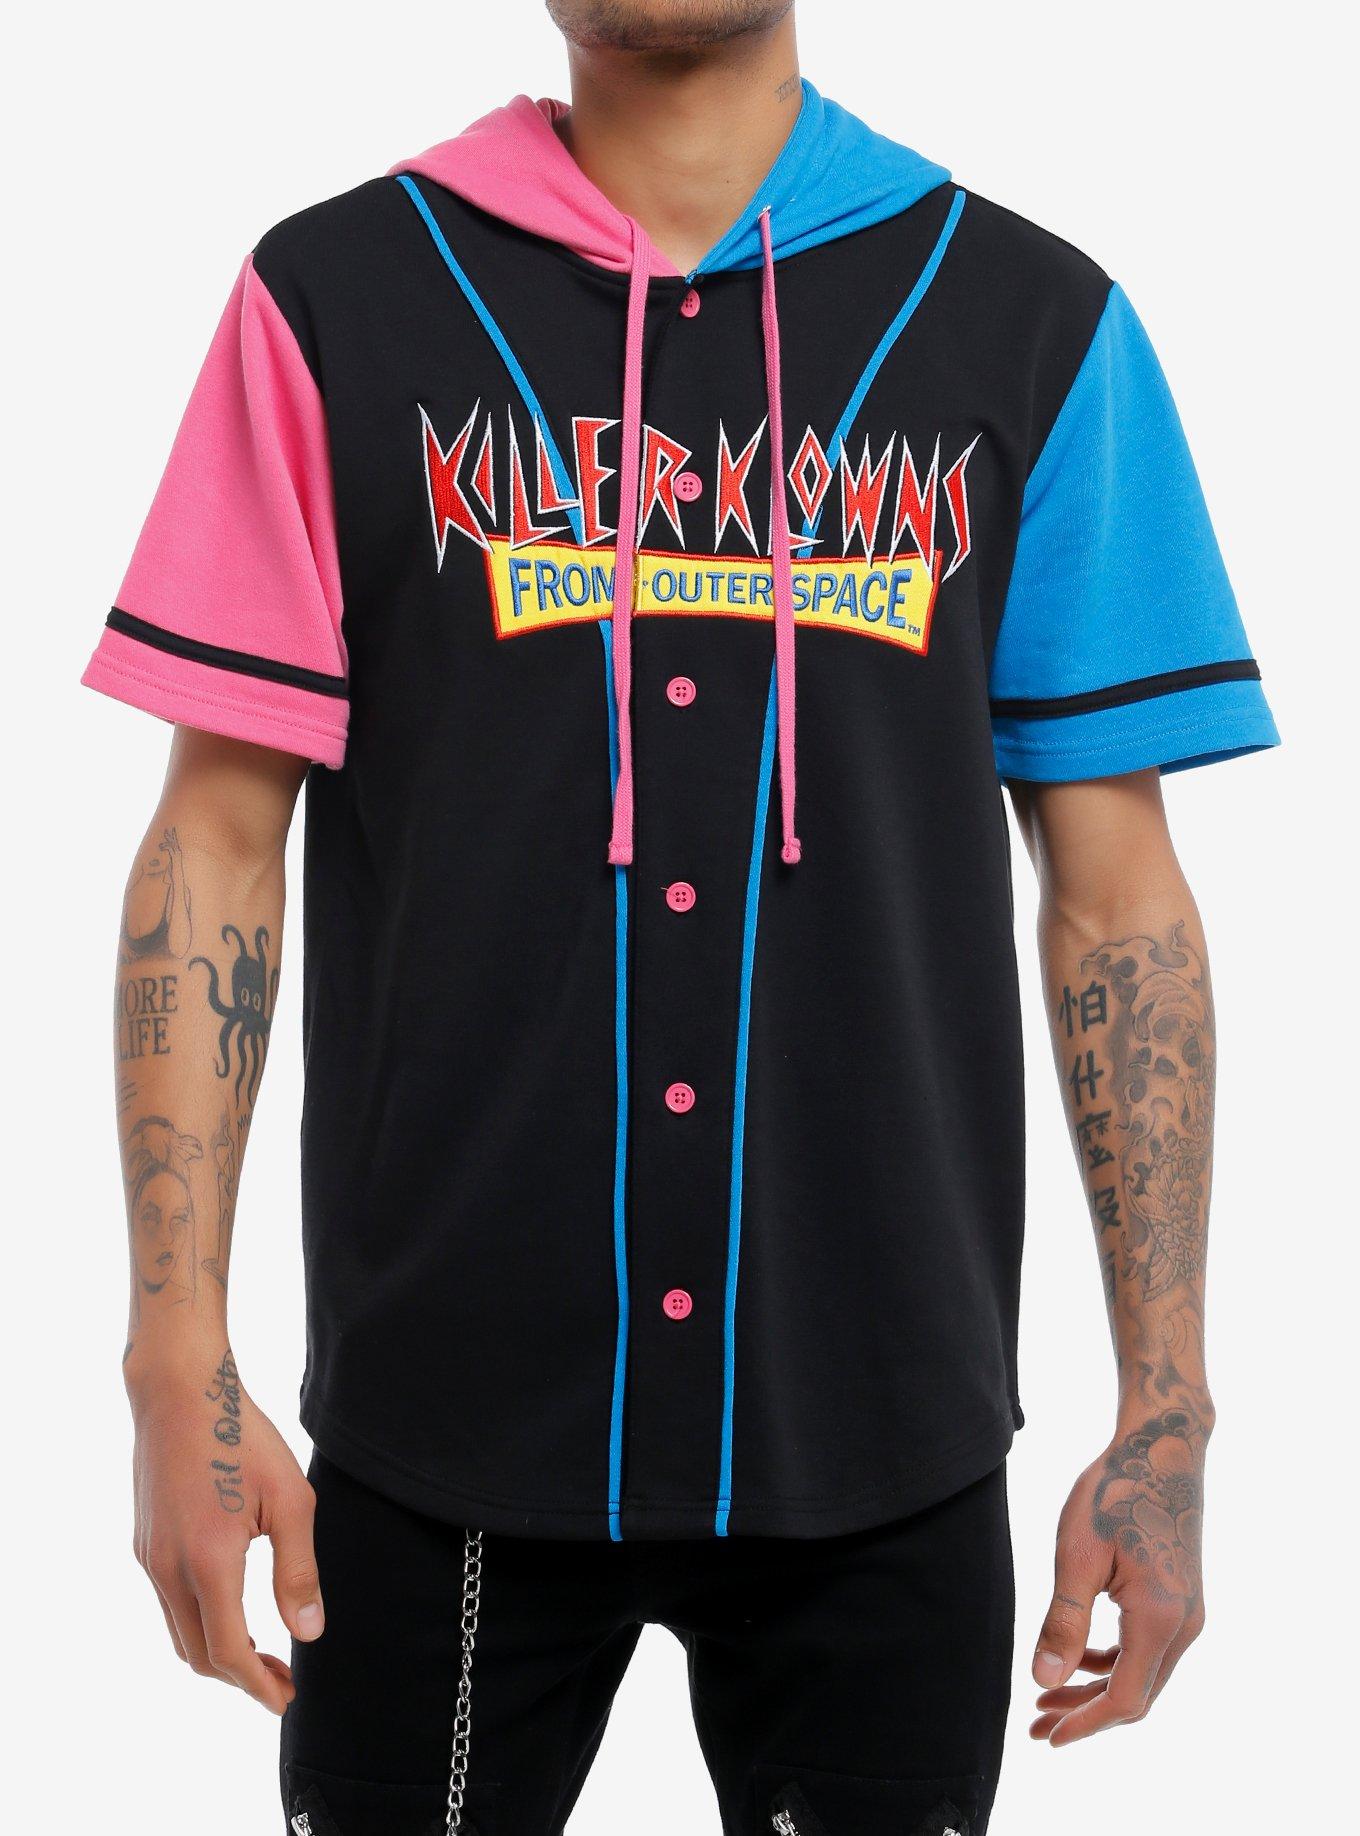 Killer Klowns From Outer Space Hooded Baseball Jersey